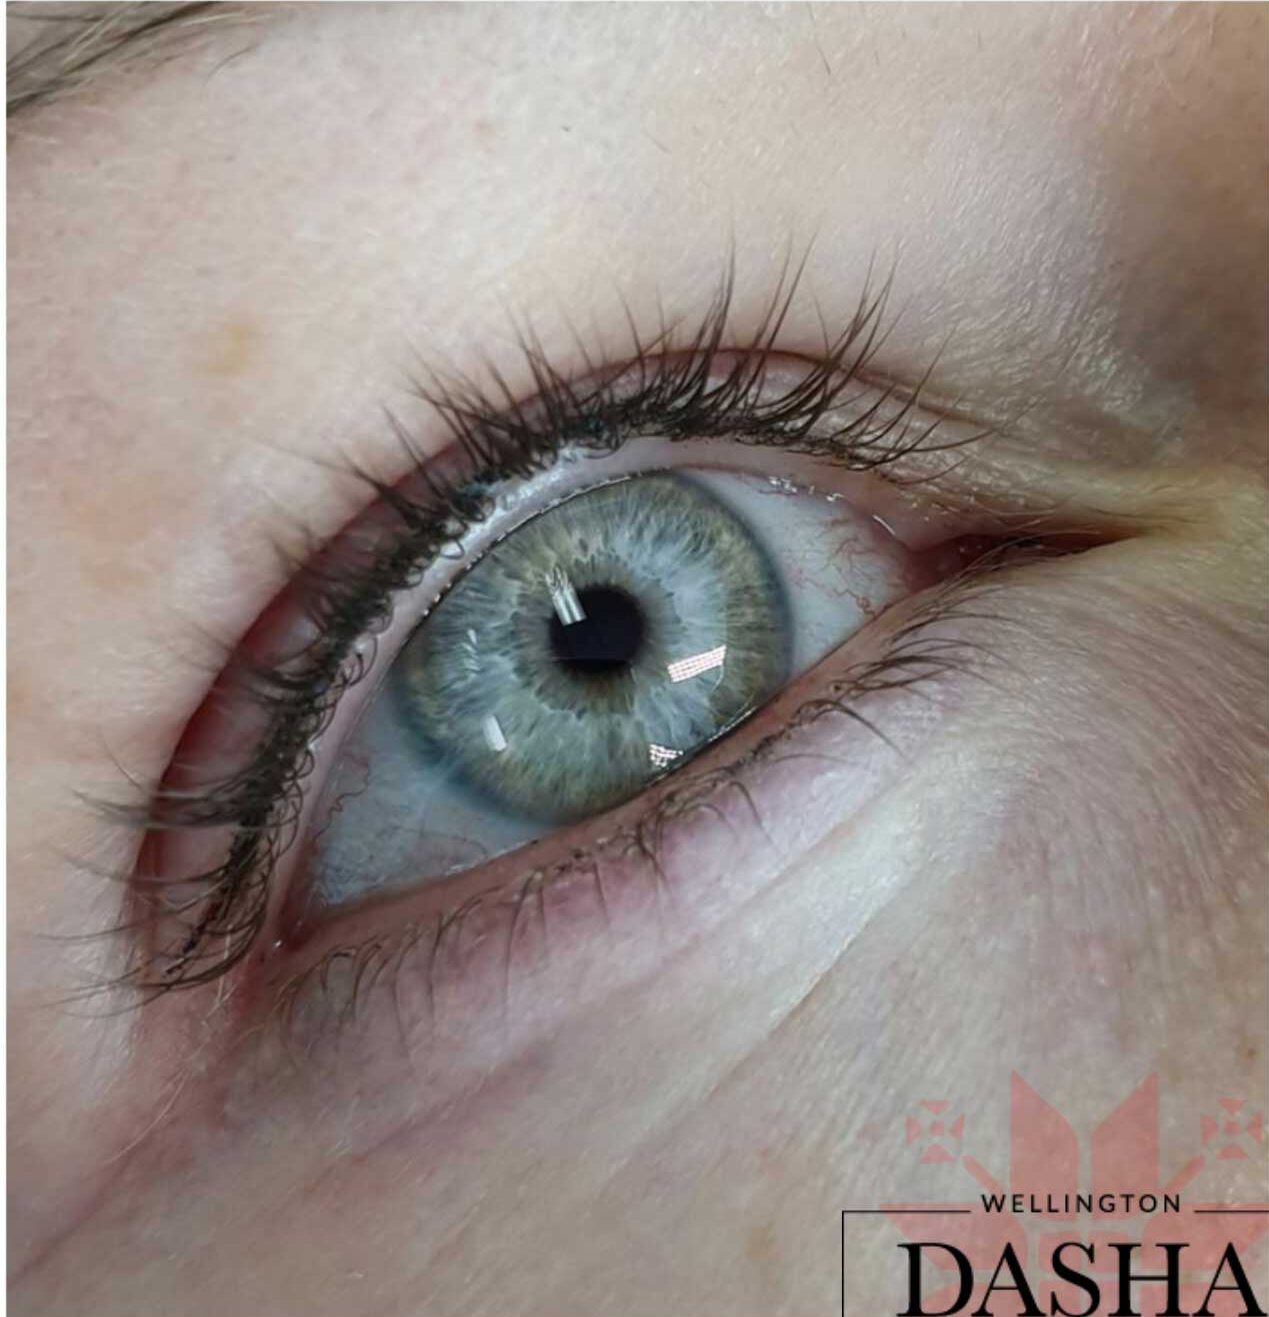 Thin Eyeliner Permanent Makeup. Cosmetic and Mediical Tattoo by Dasha. Permanent makeup and reconstructive tattoo, scalp micro-pigmentation in Christchurch, New Zealand